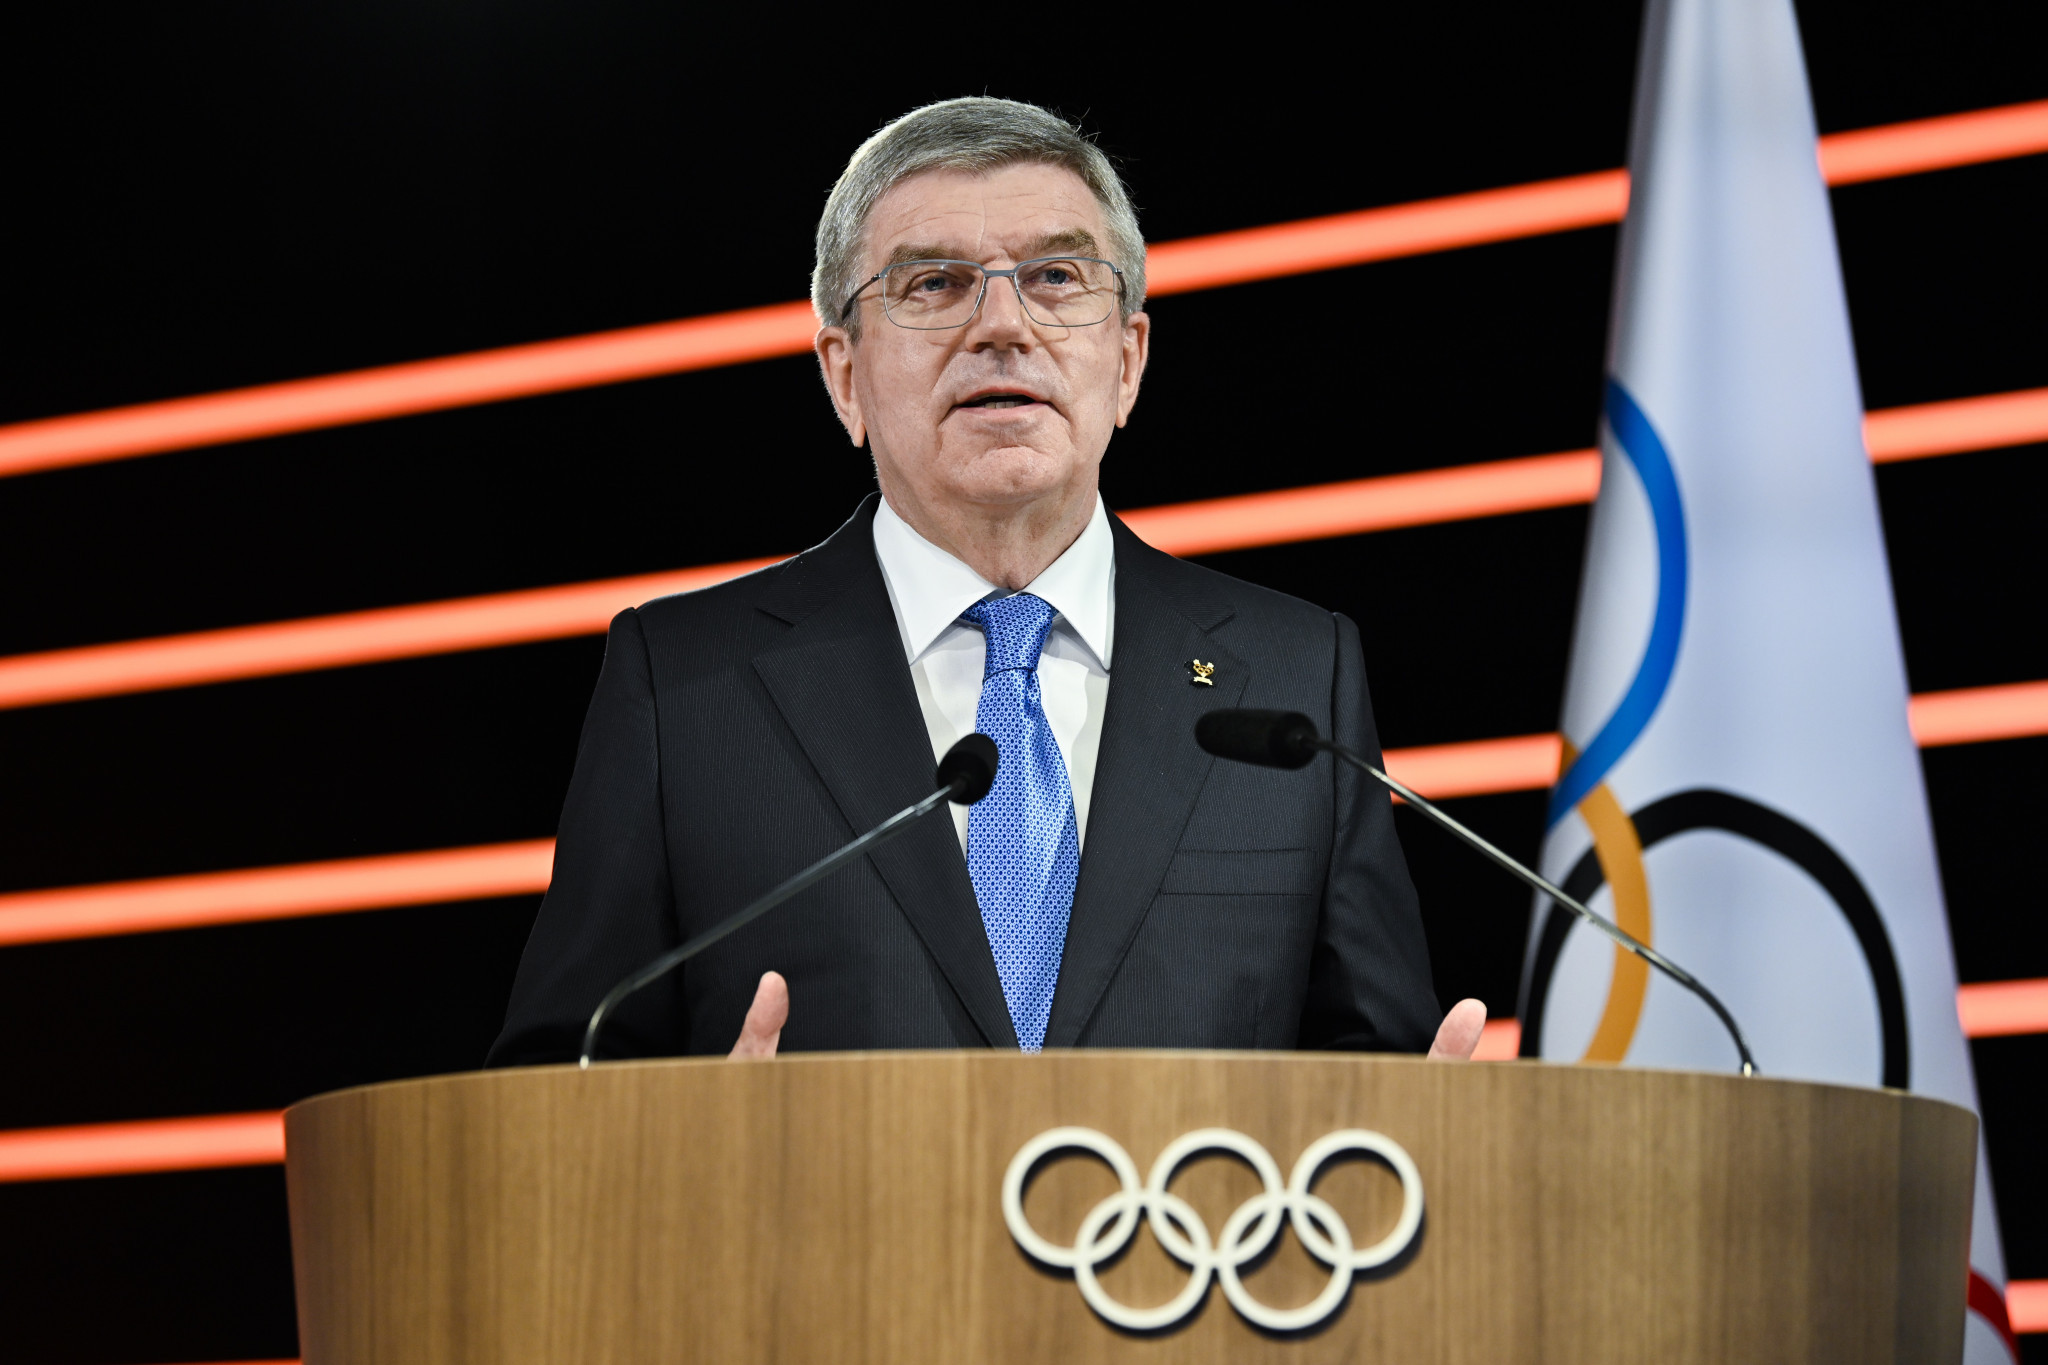 IOC President Thomas Bach is expected to hold an Executive Board meeting in Lausanne tomorrow ©IOC